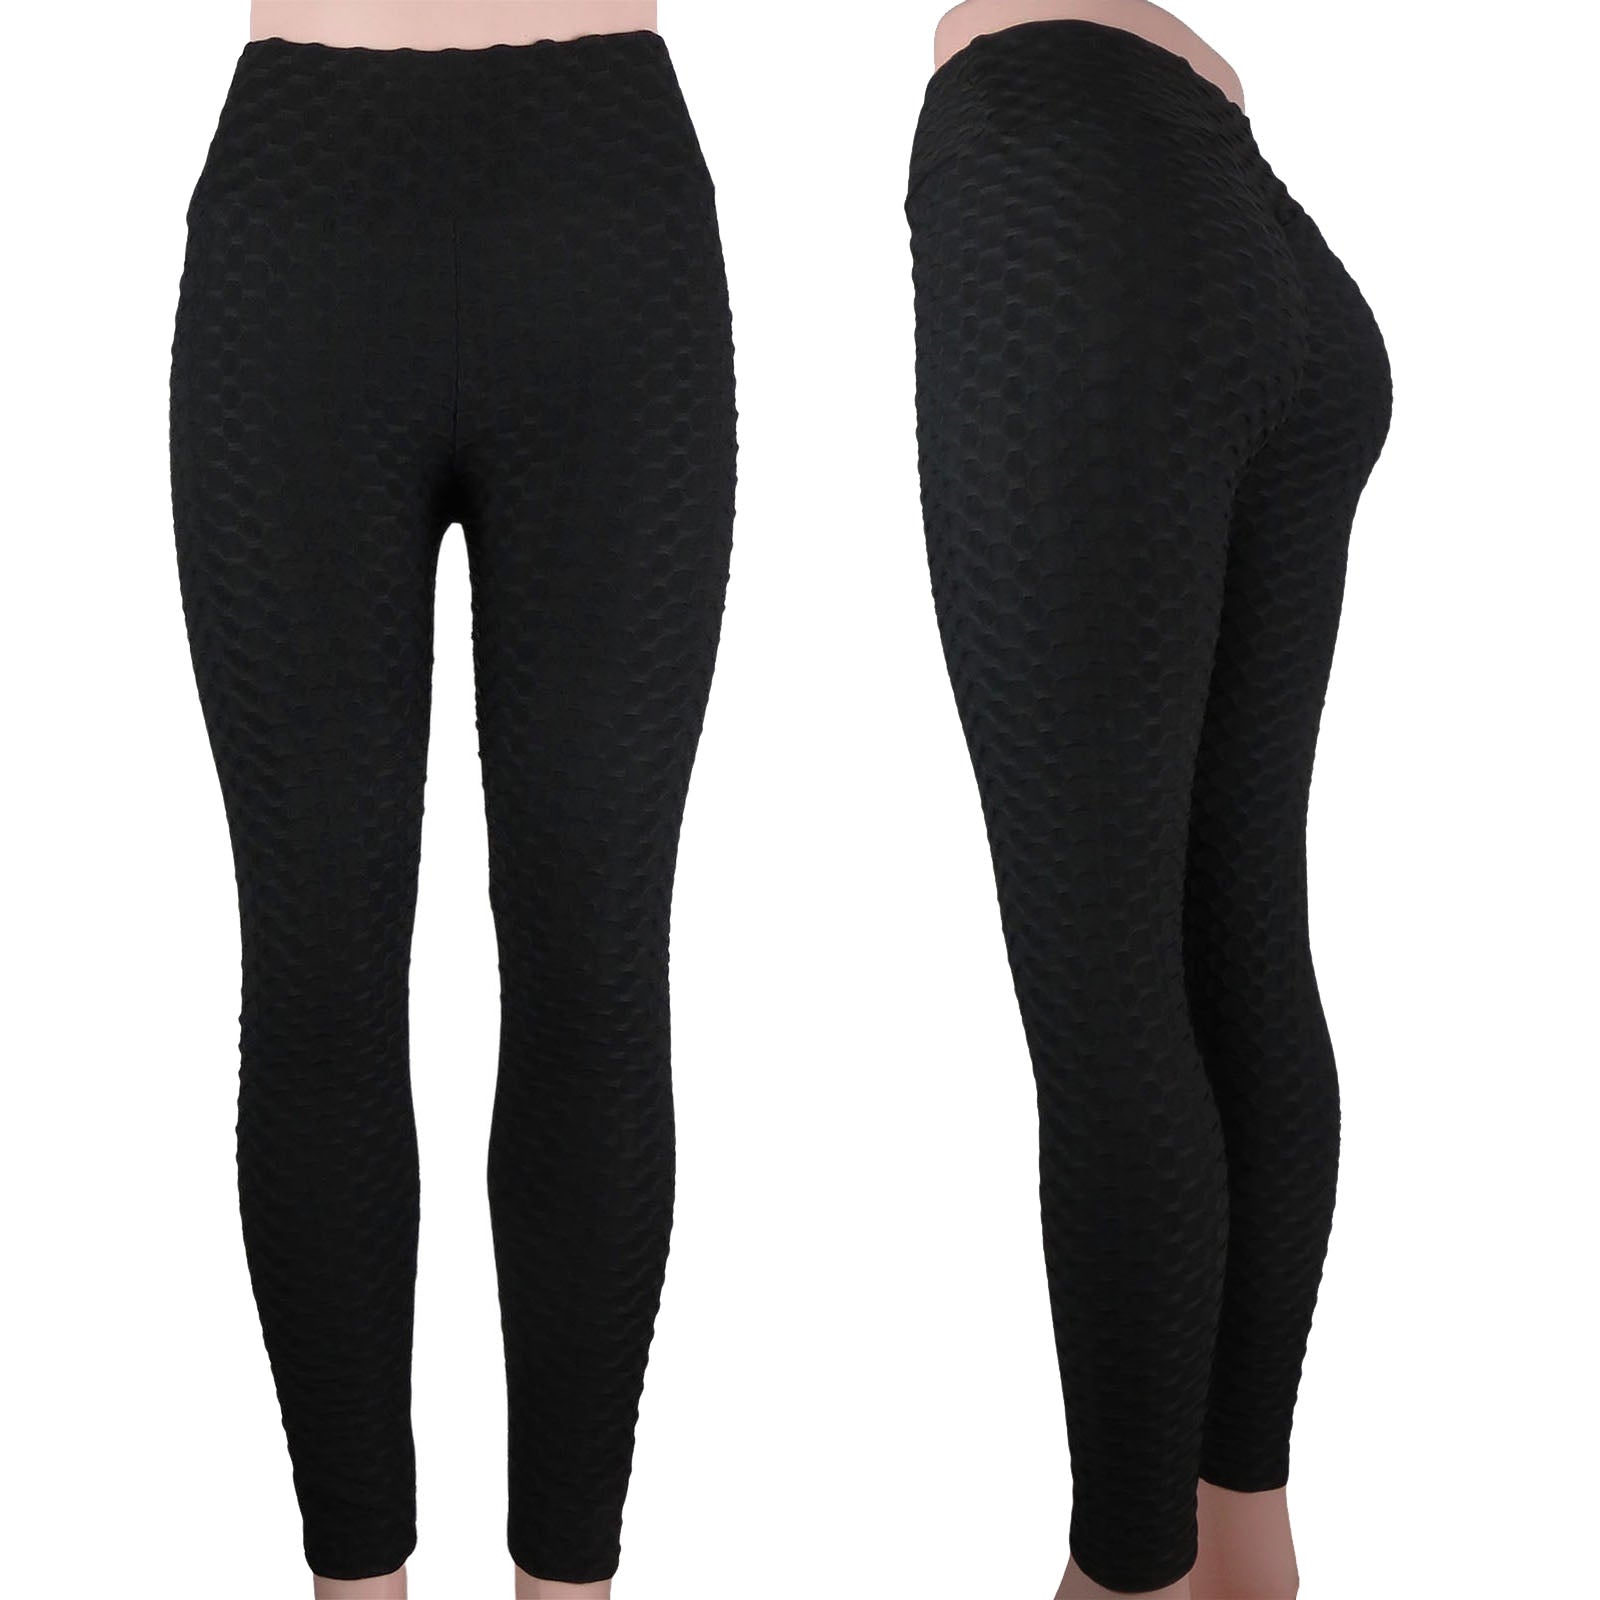 Wholesale bubble pattern tiktok leggings with a high waist and anti cellulite scrunch butt compression in black